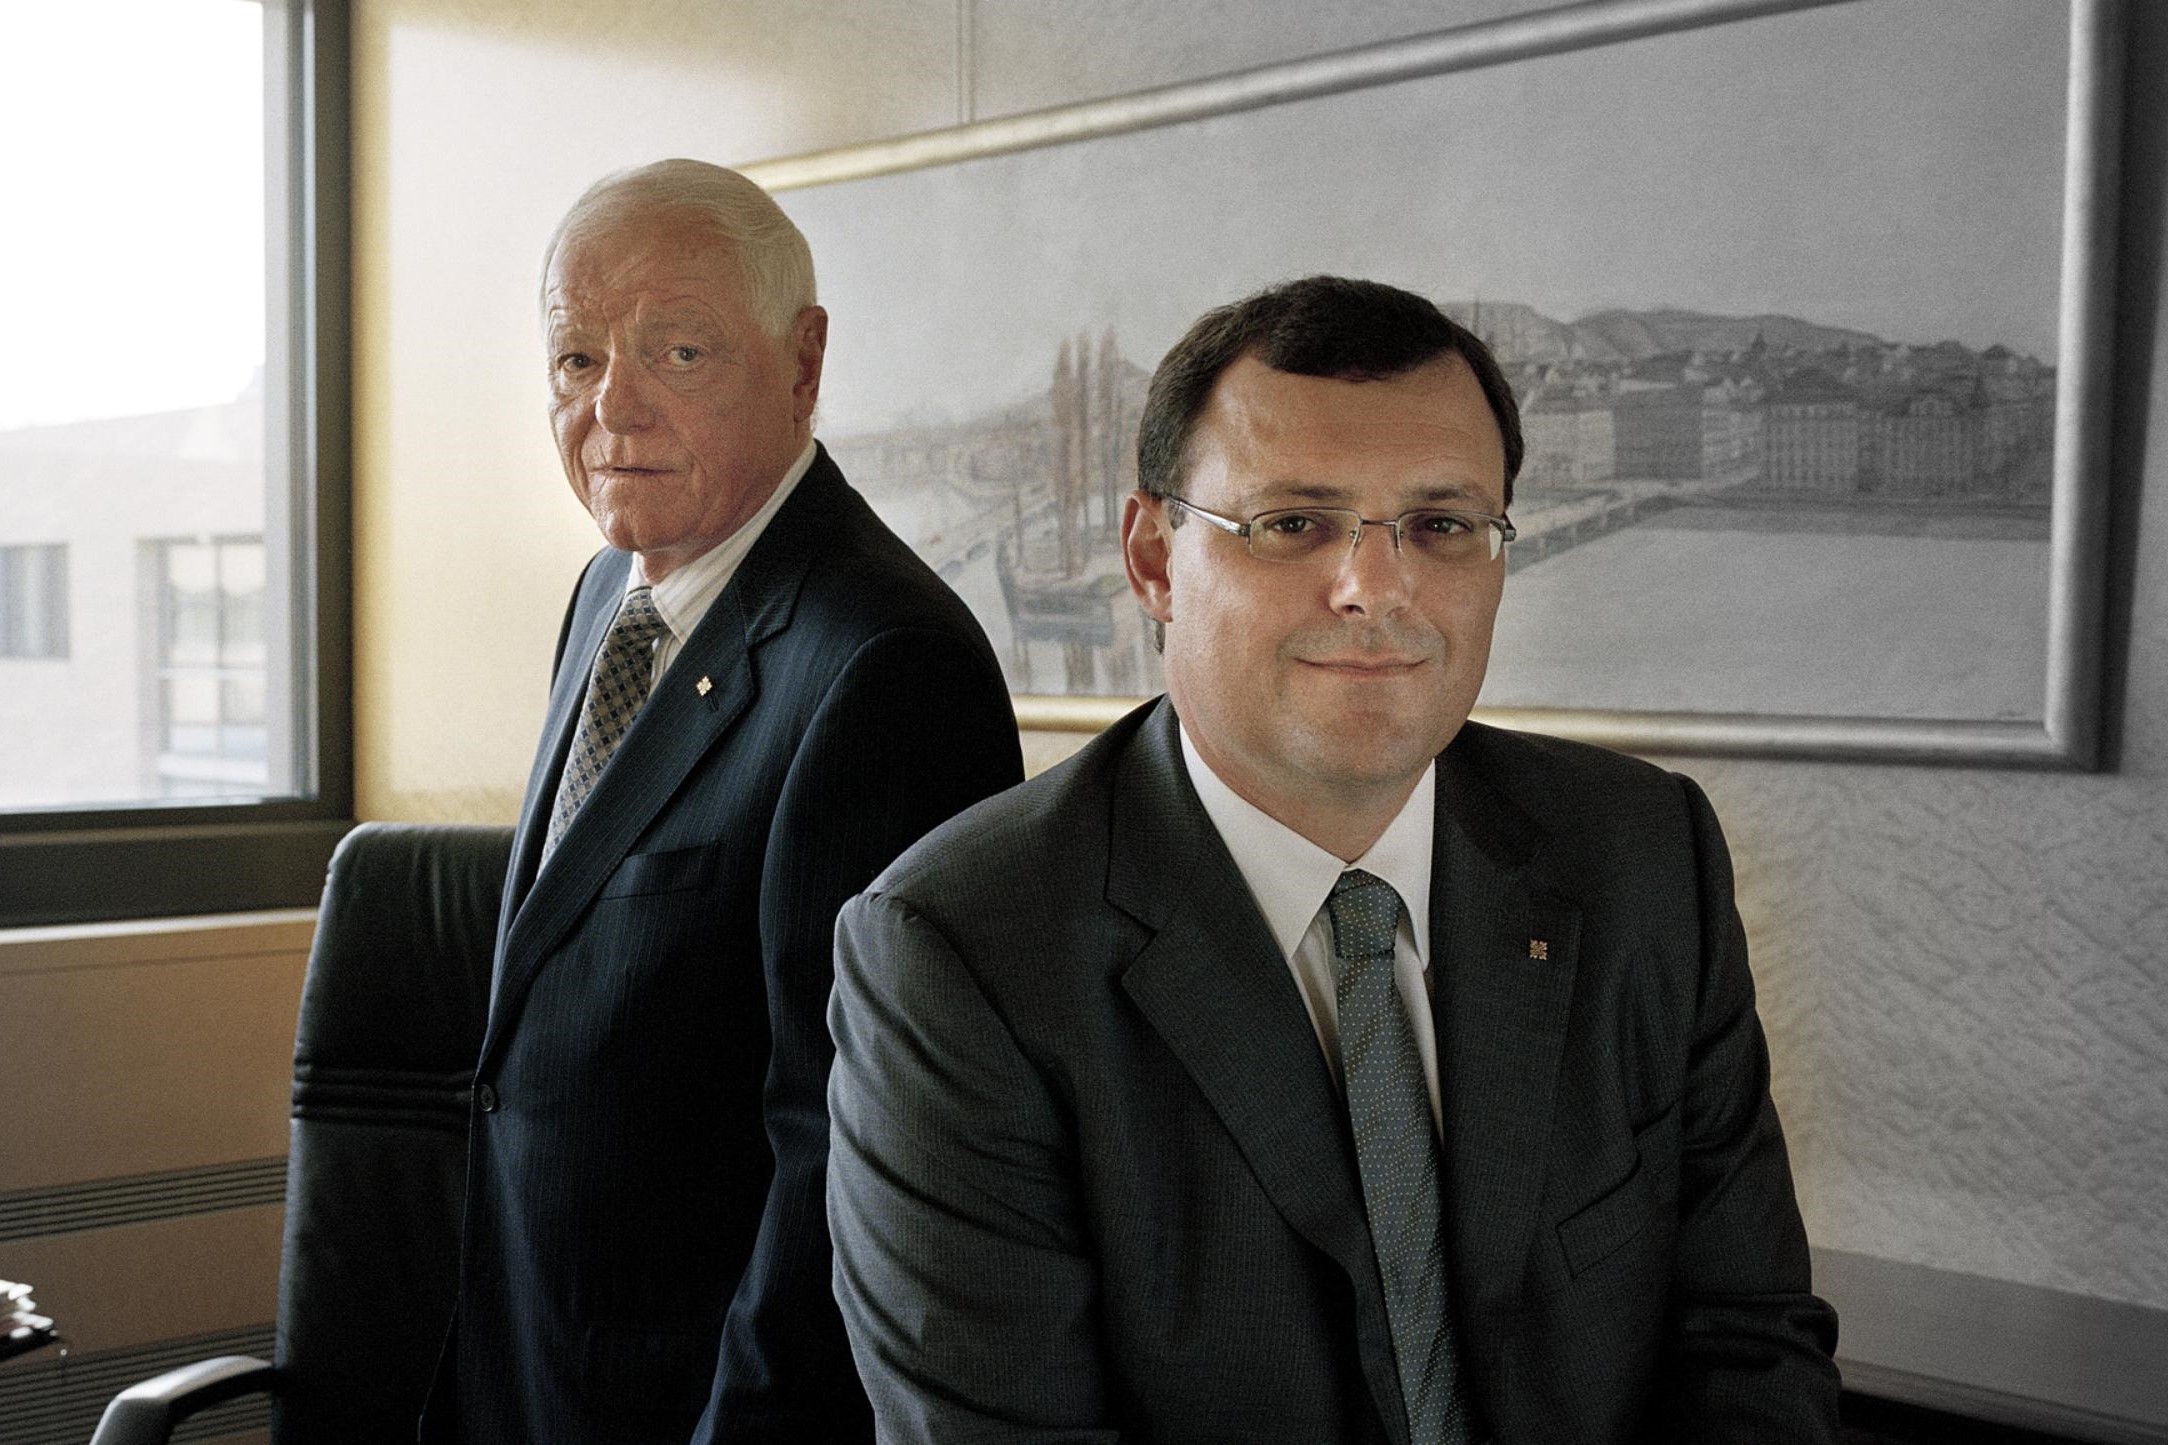 Interview with Patek Philippe President Thierry Stern and Wempe